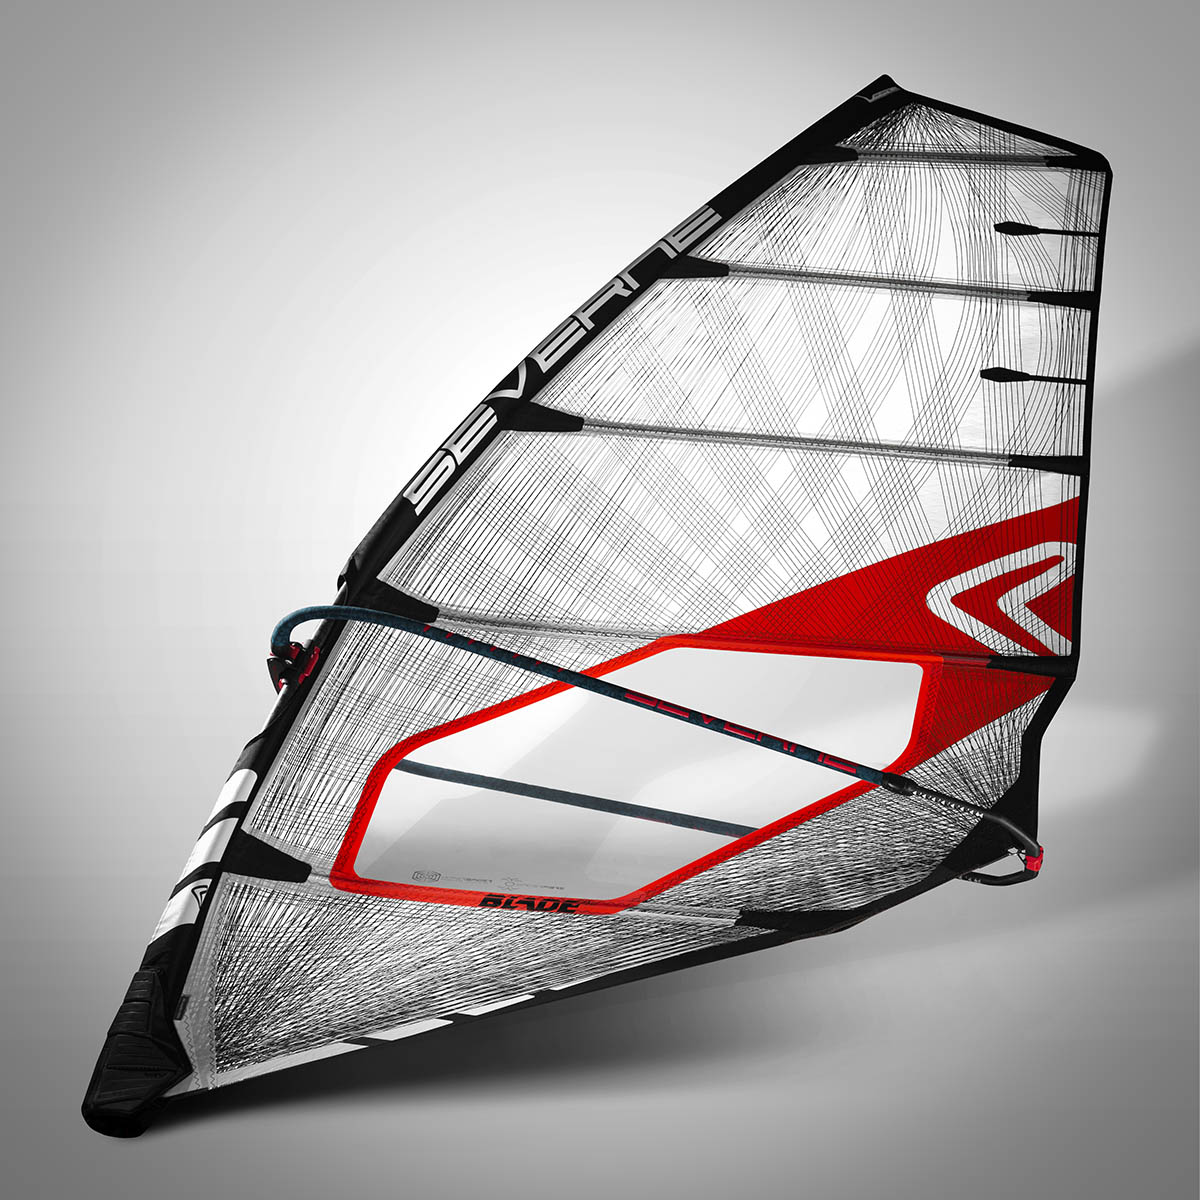 Blade Pro | Wave Sail | Severne - Gear for the revolution